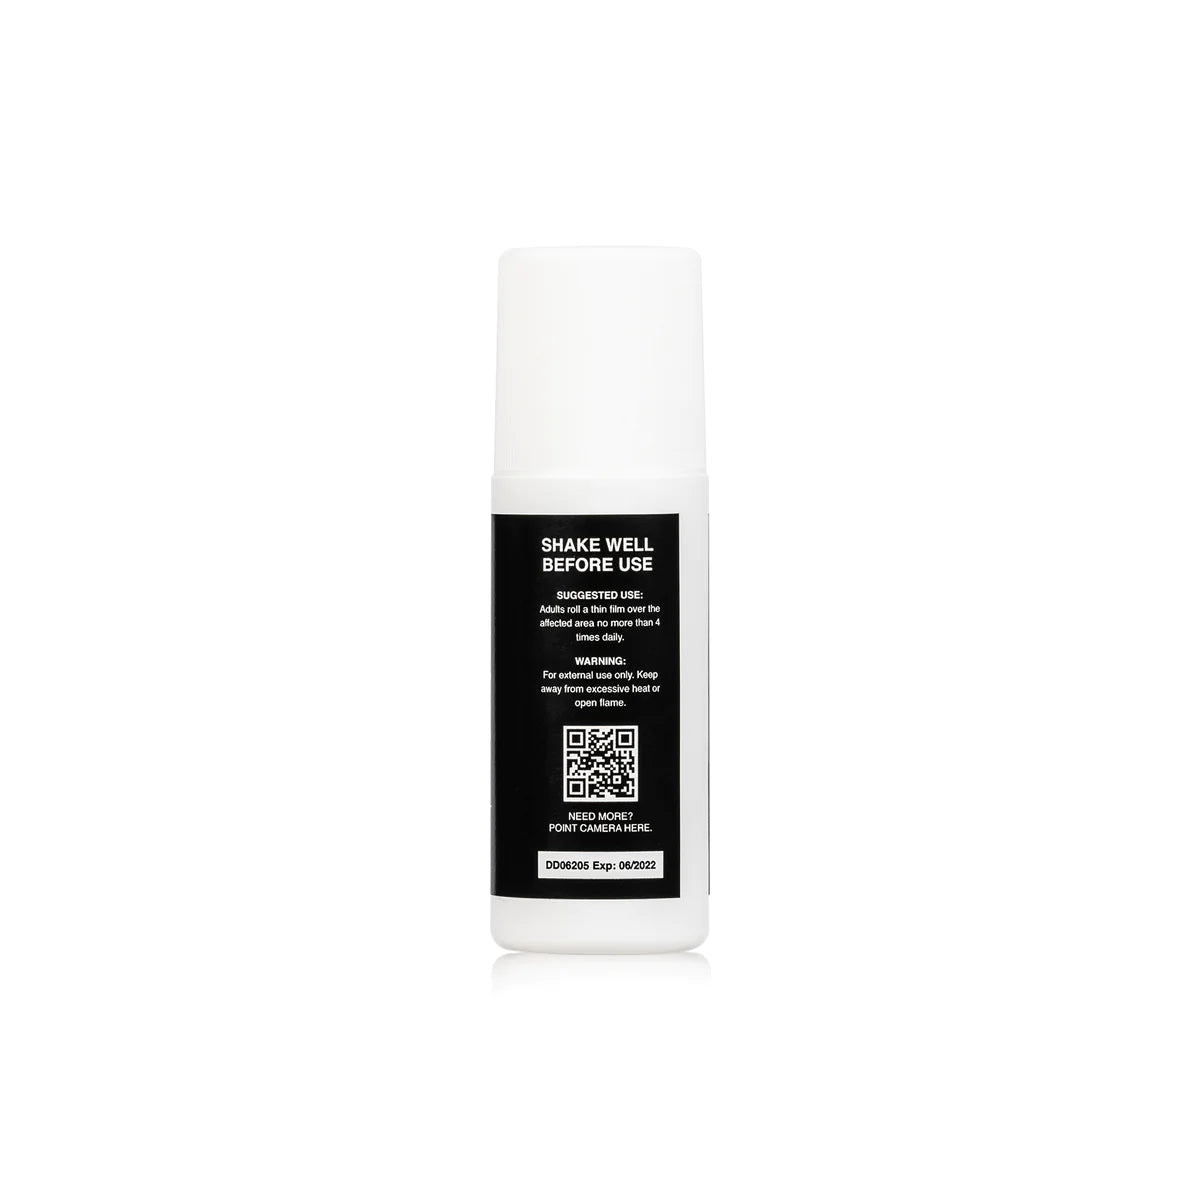 DYNAMIC ARTIST RELIEF COOLING GEL - 4OZ ROLL ON